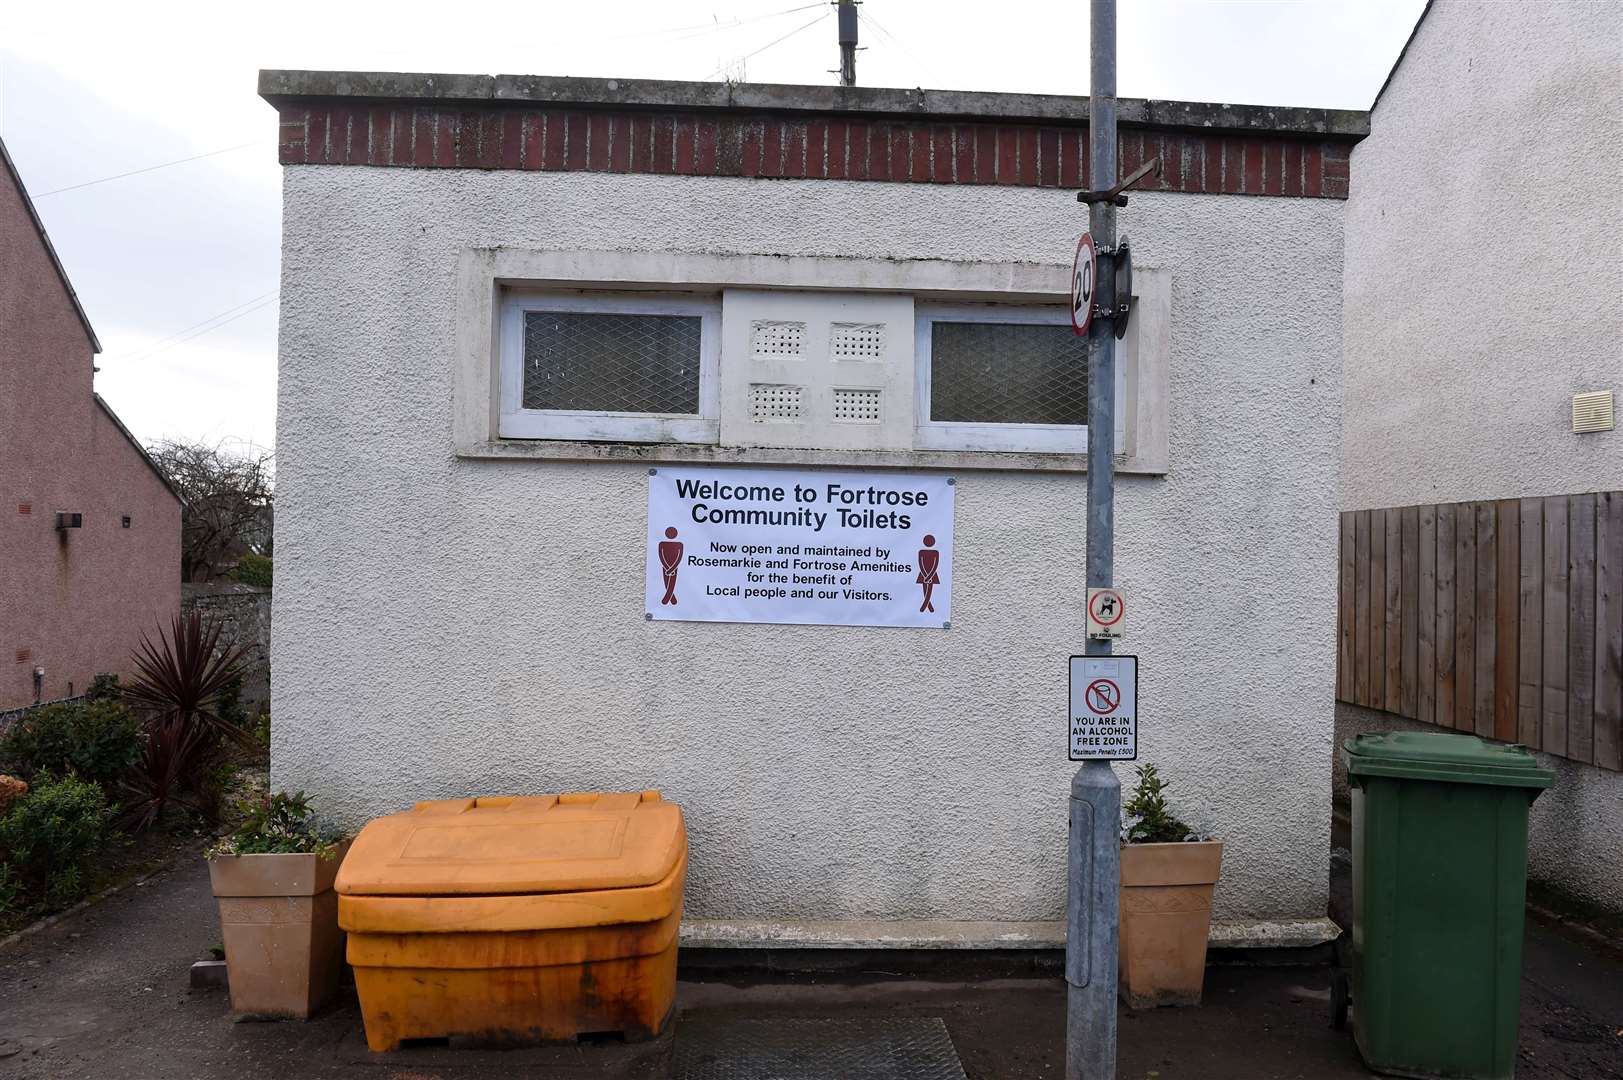 A community group called Rosemarkie and Fortrose Trust was formed to take over public toilets that would otherwise have closed.